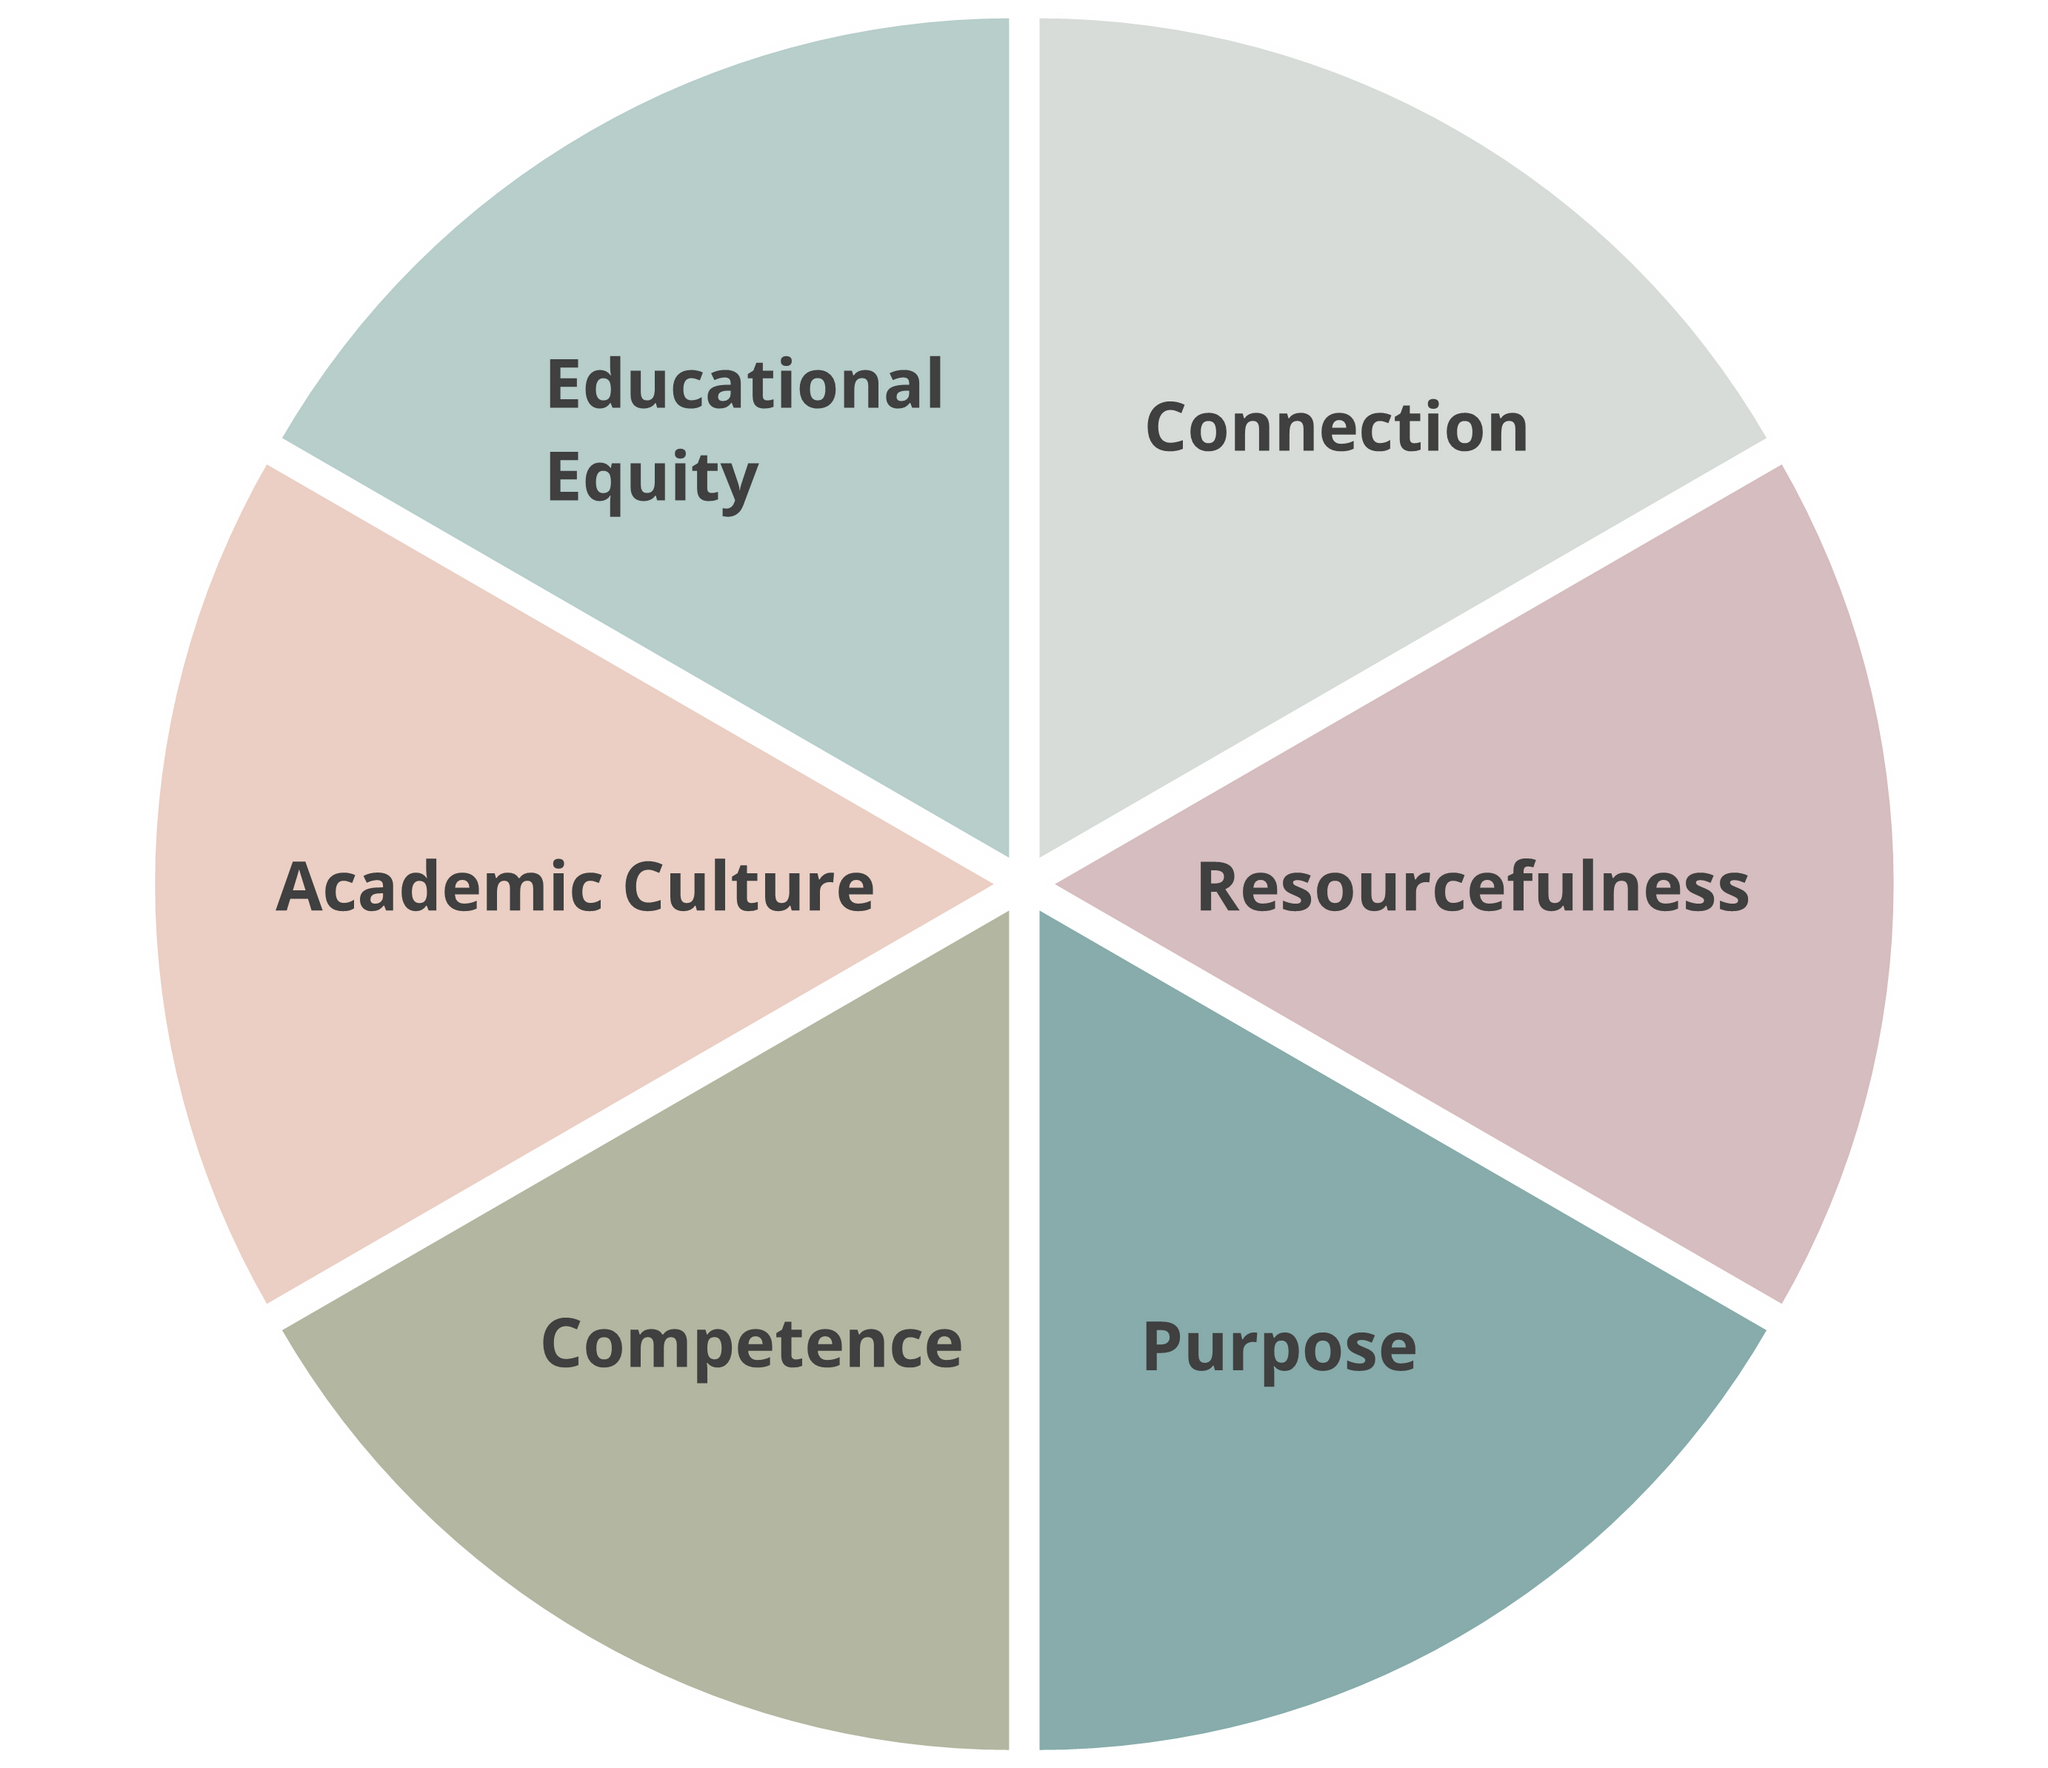 pie chart with 6 sections: Connection, Resourcefulness, Purpose, Competence, Academic Culture, and Educational Equity